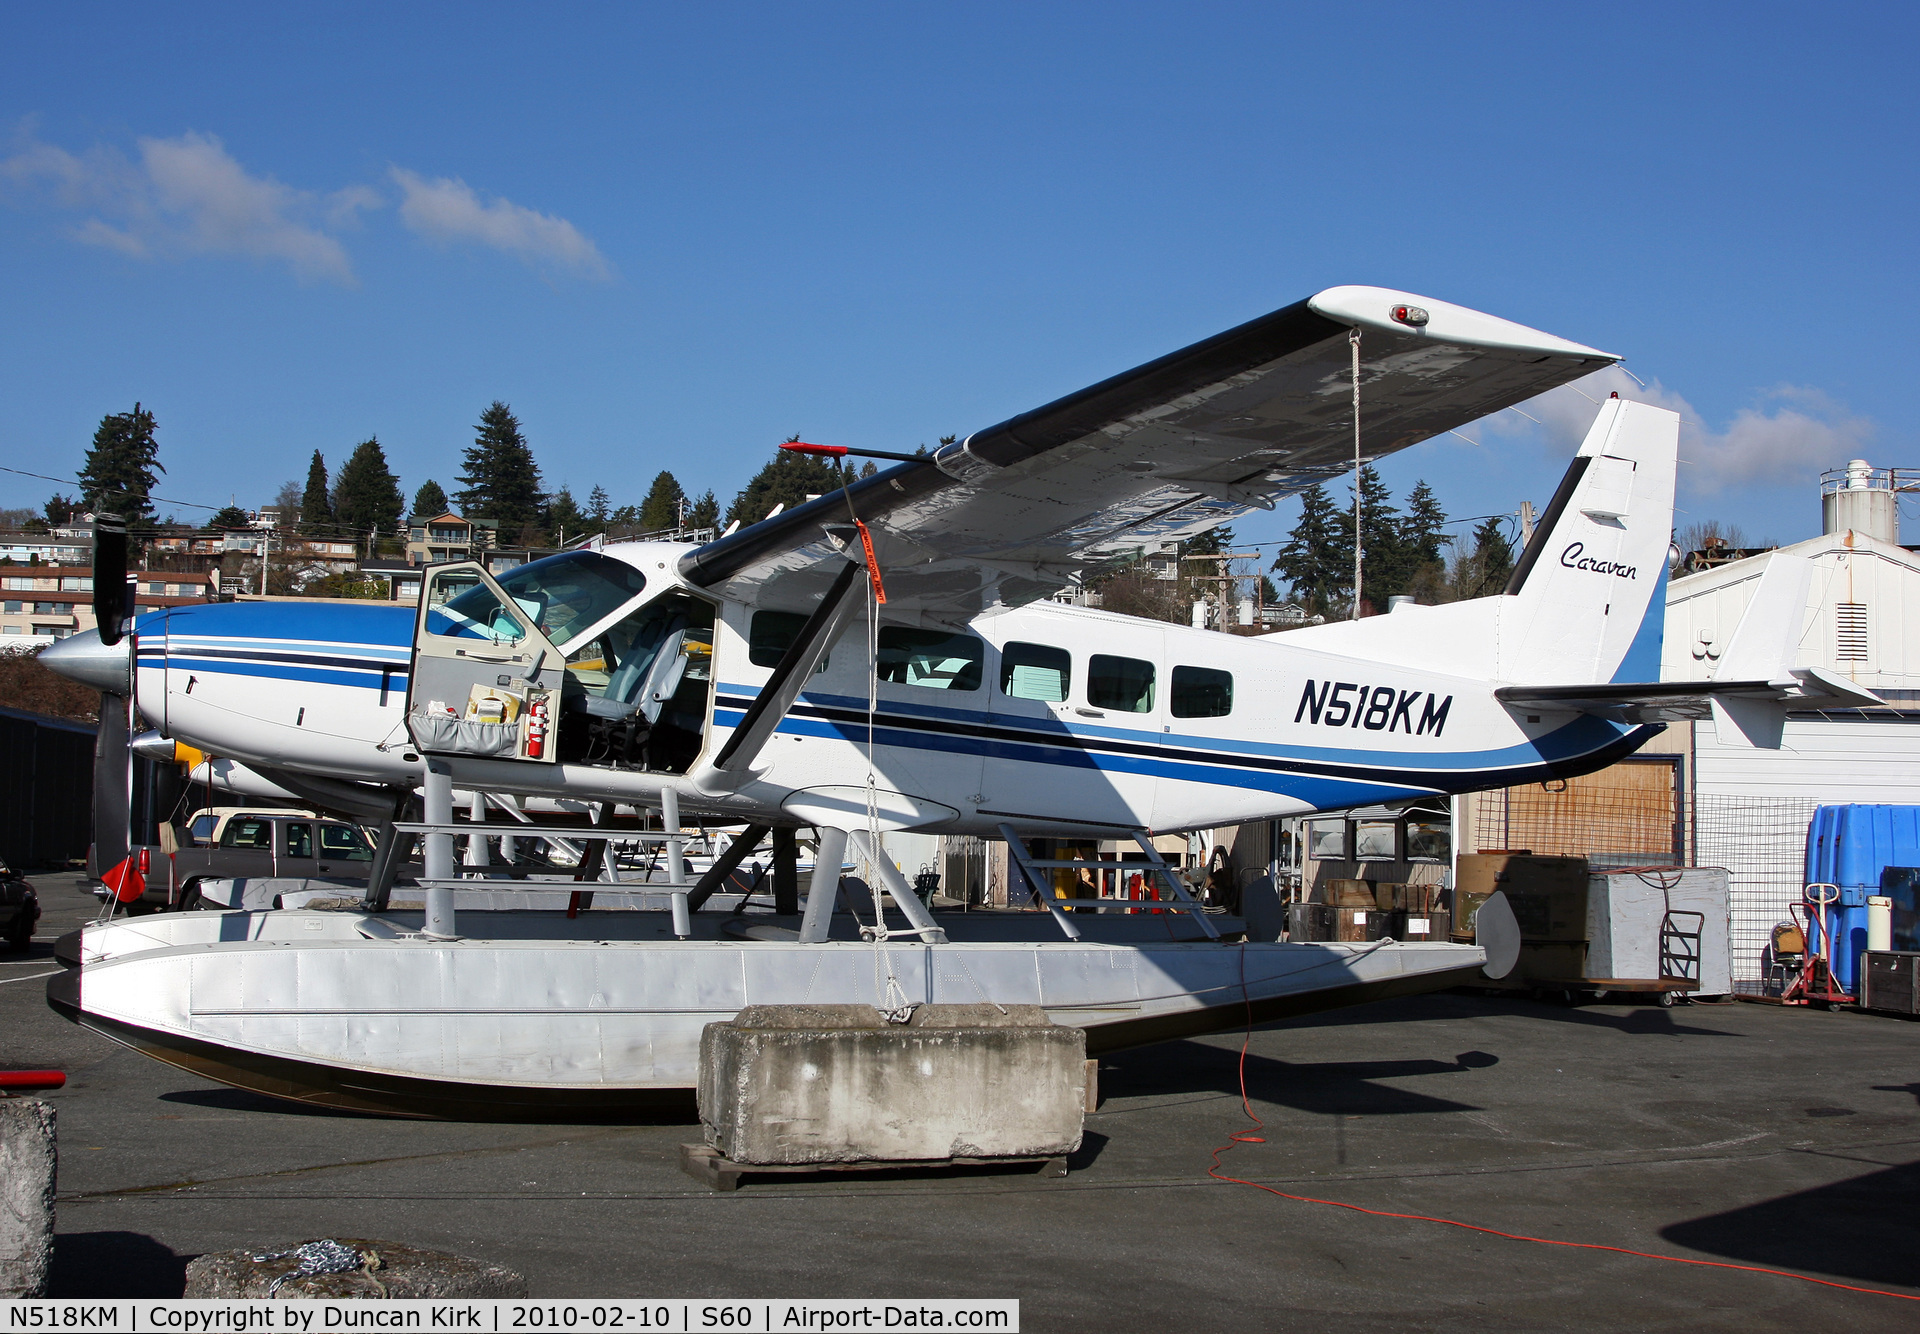 N518KM, Cessna 208 Caravan I C/N 208-00279, Sunny winter day out of the water